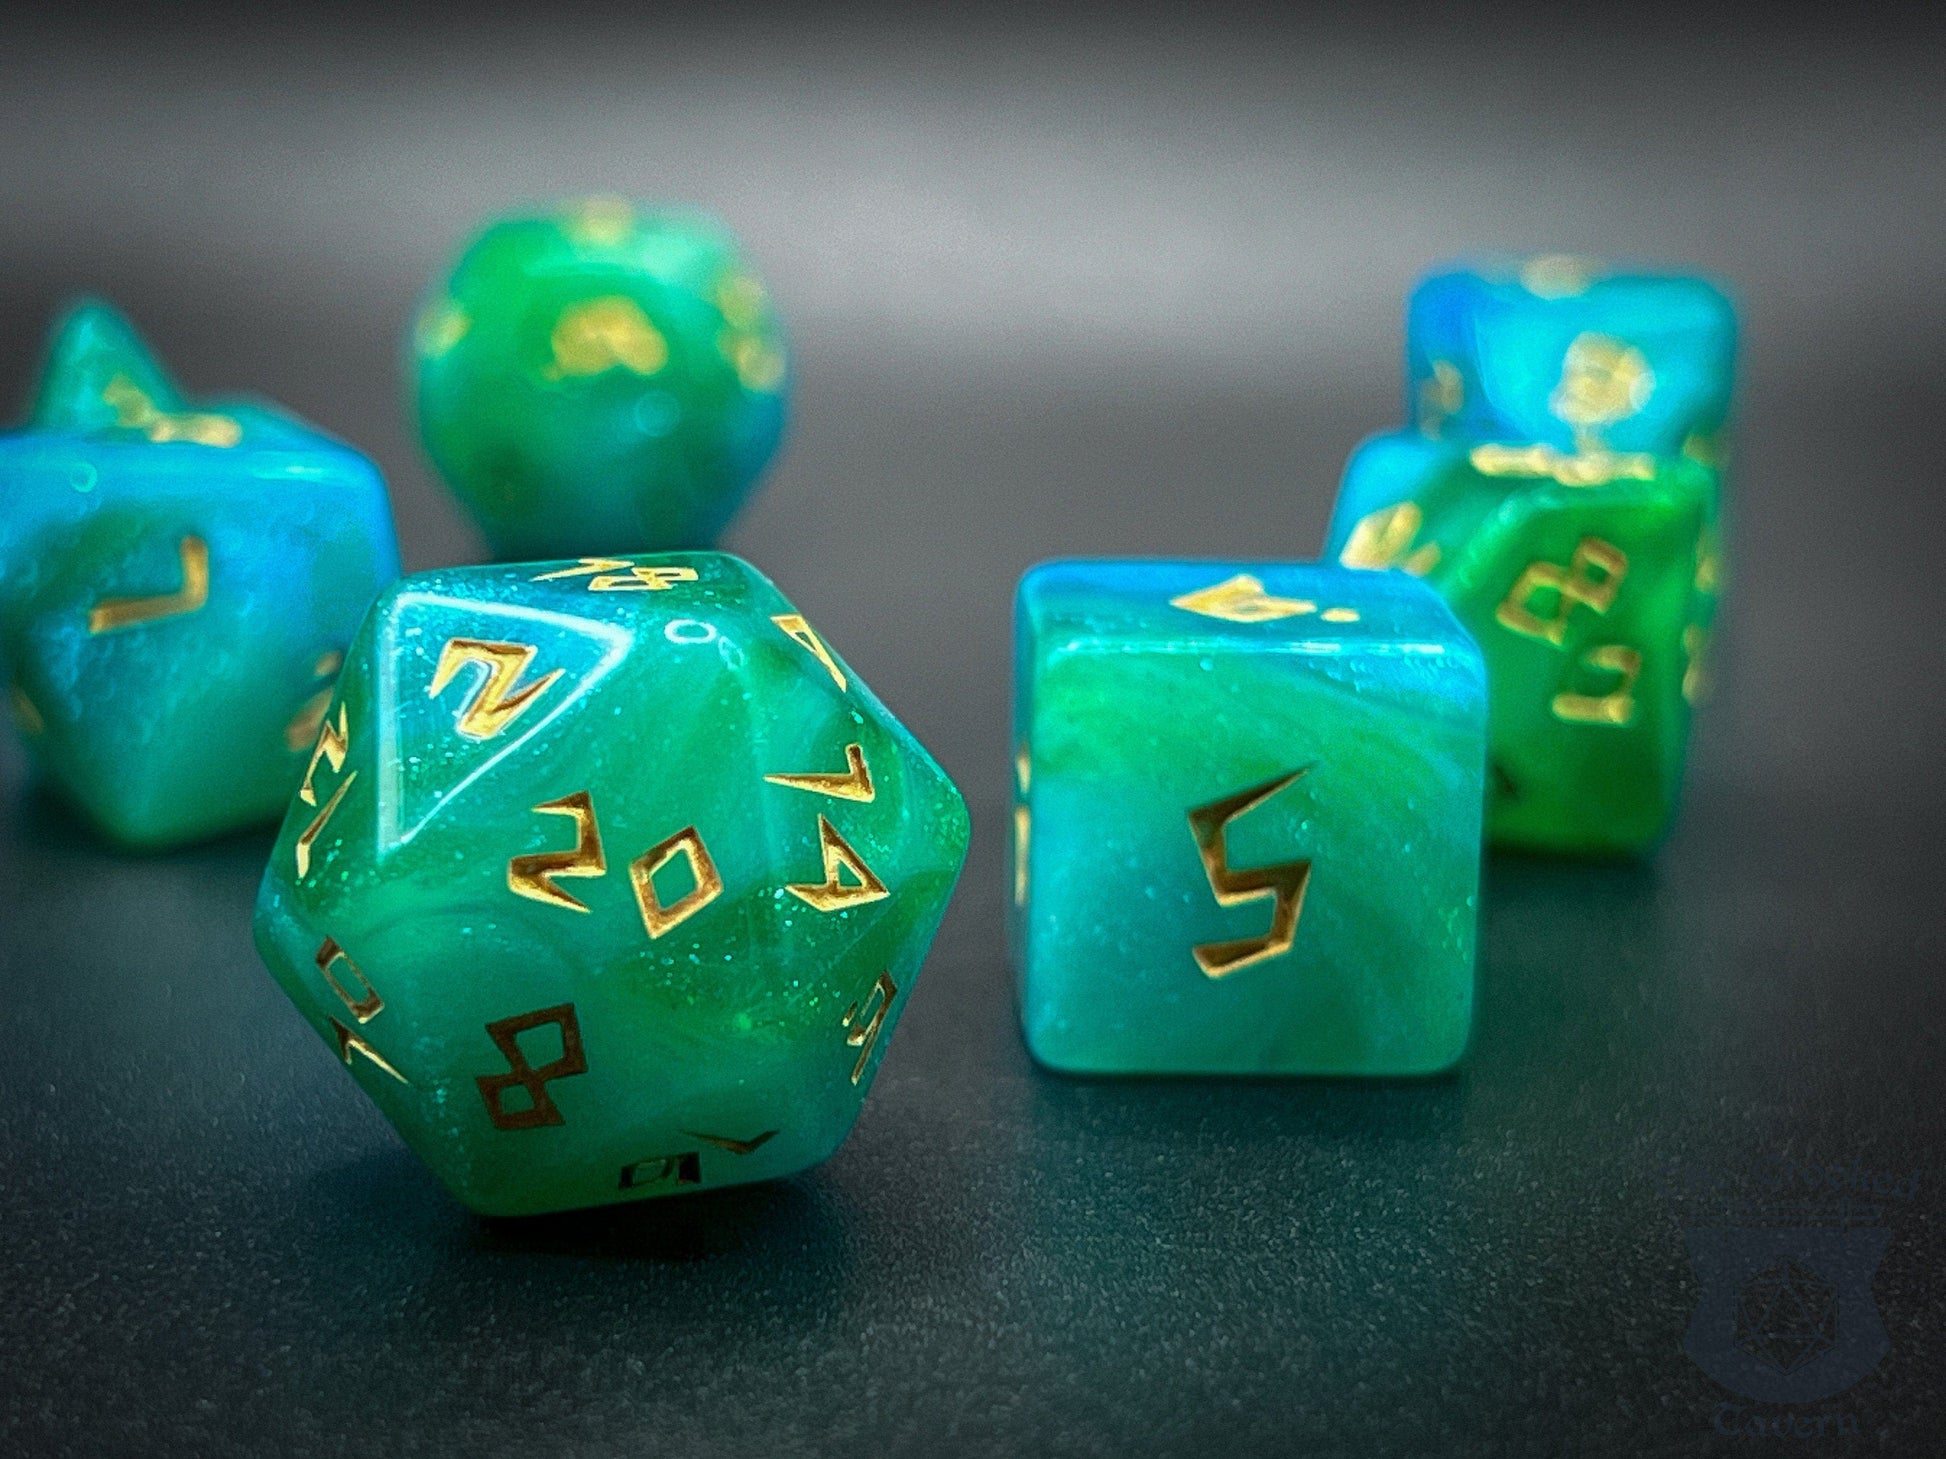 The Crooked Tavern Dice Sets Jade Runes RPG Dice Set | Plastic Blue, Green with Runic Font